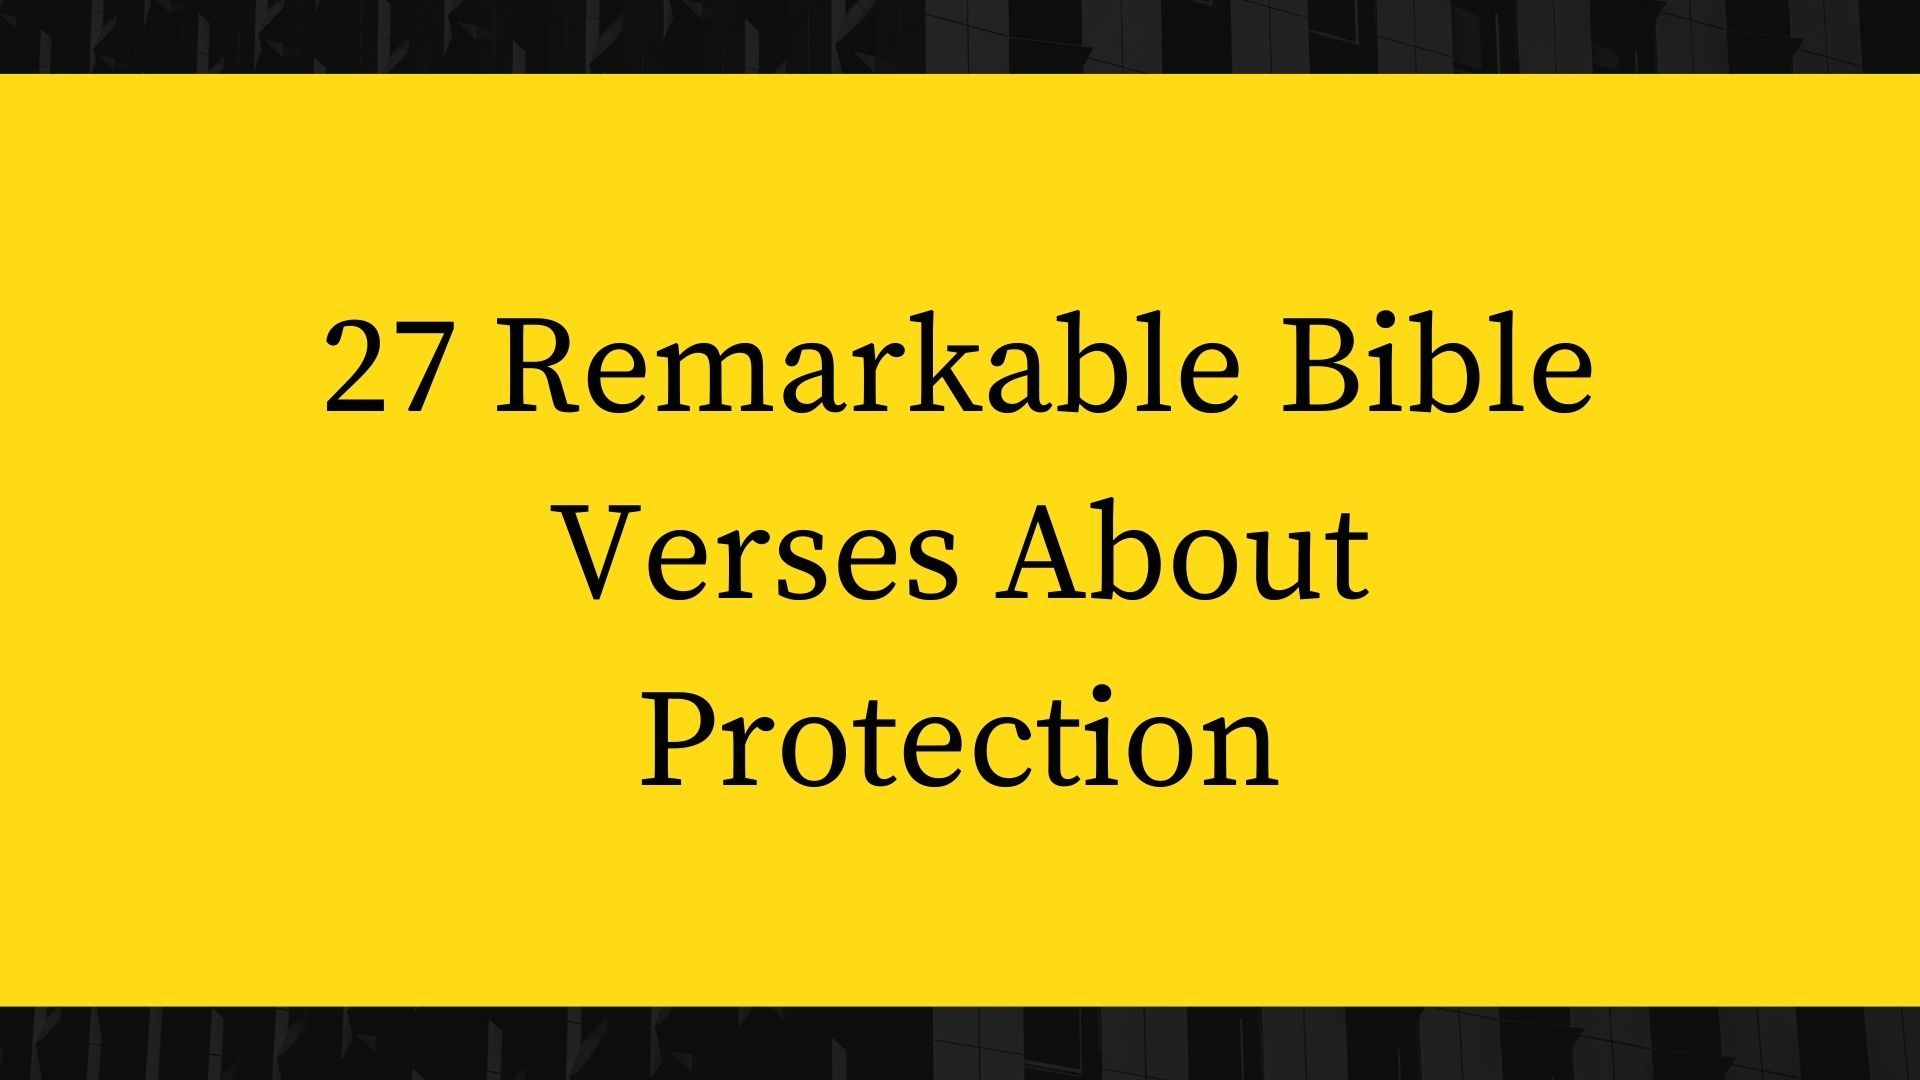 27 Remarkable Bible Verses About Protection